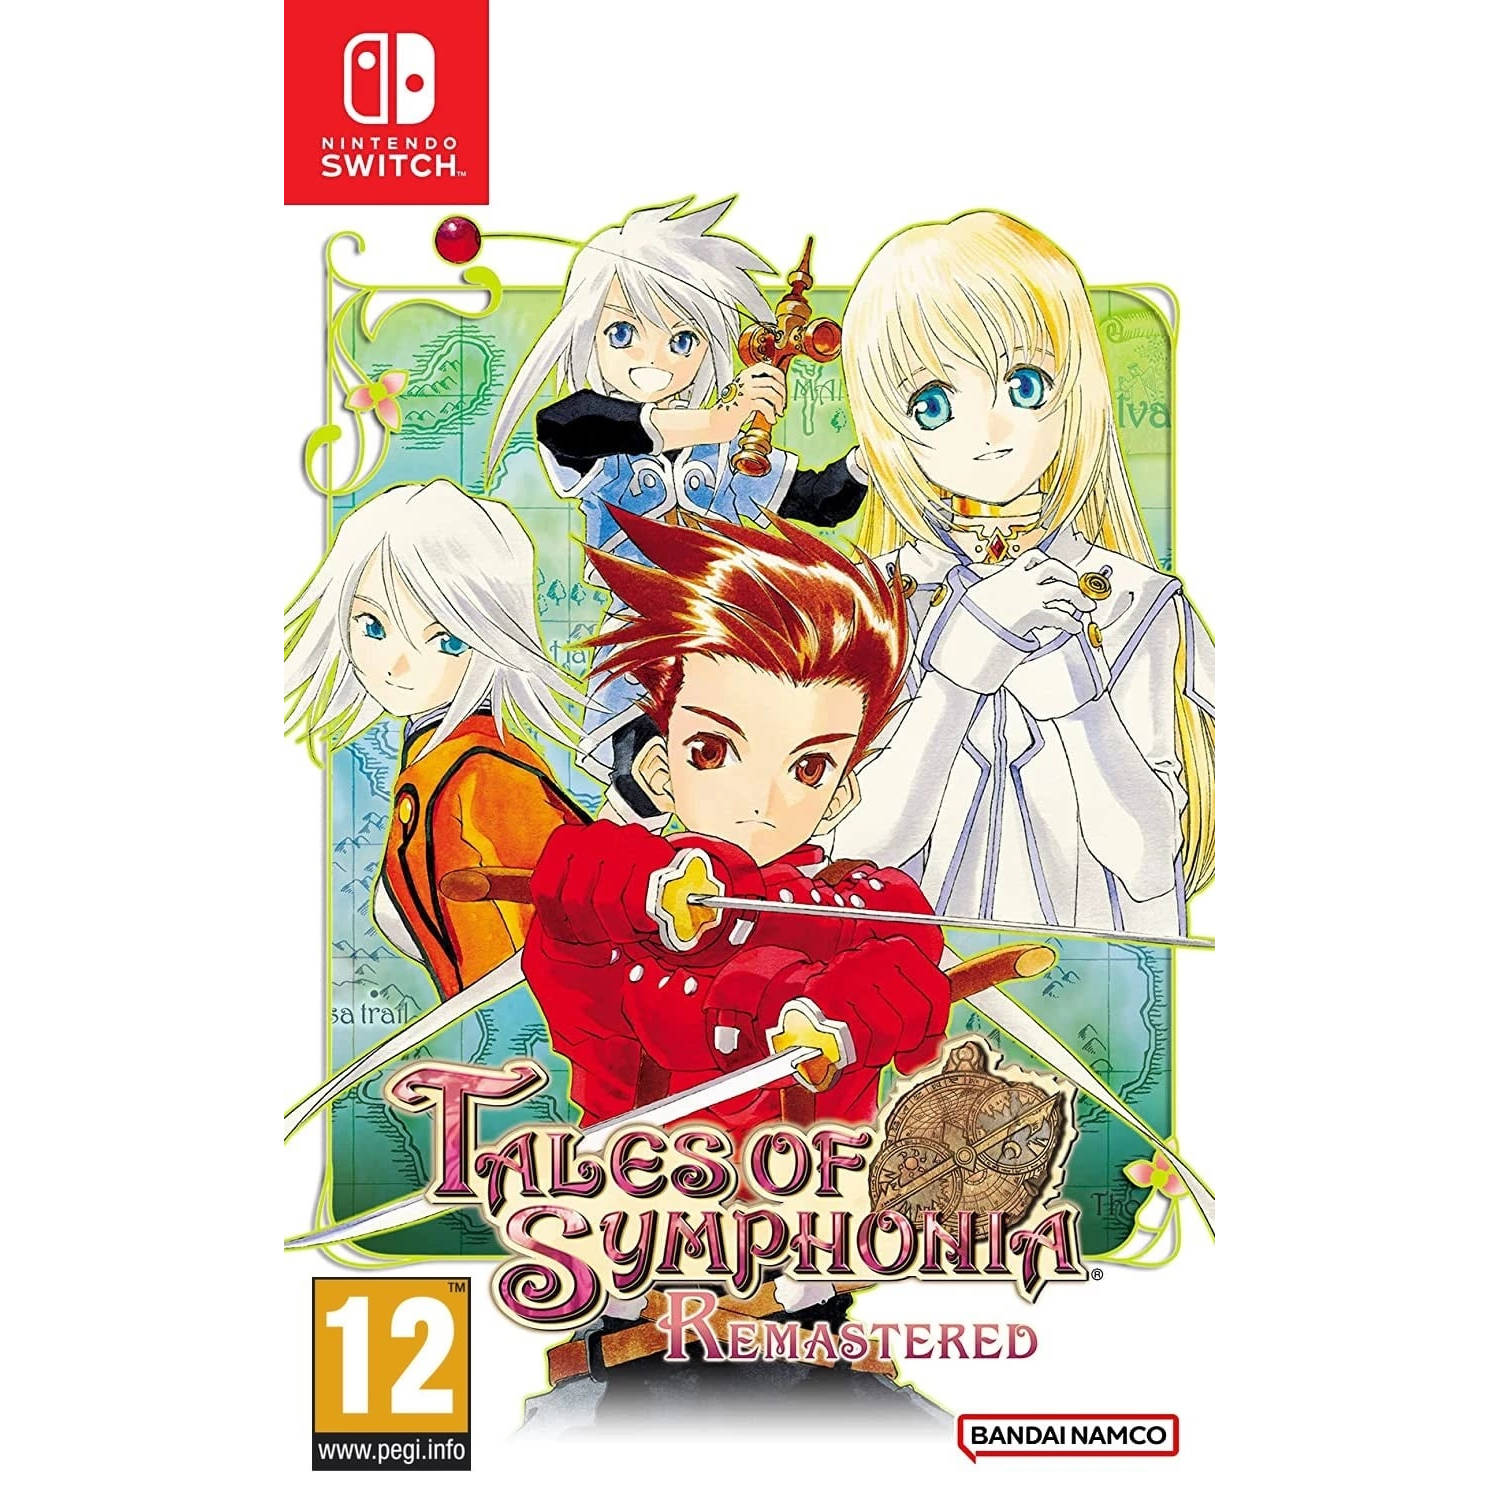 Tales of Symphonia: Remastered Chosen edition Nintendo Switch